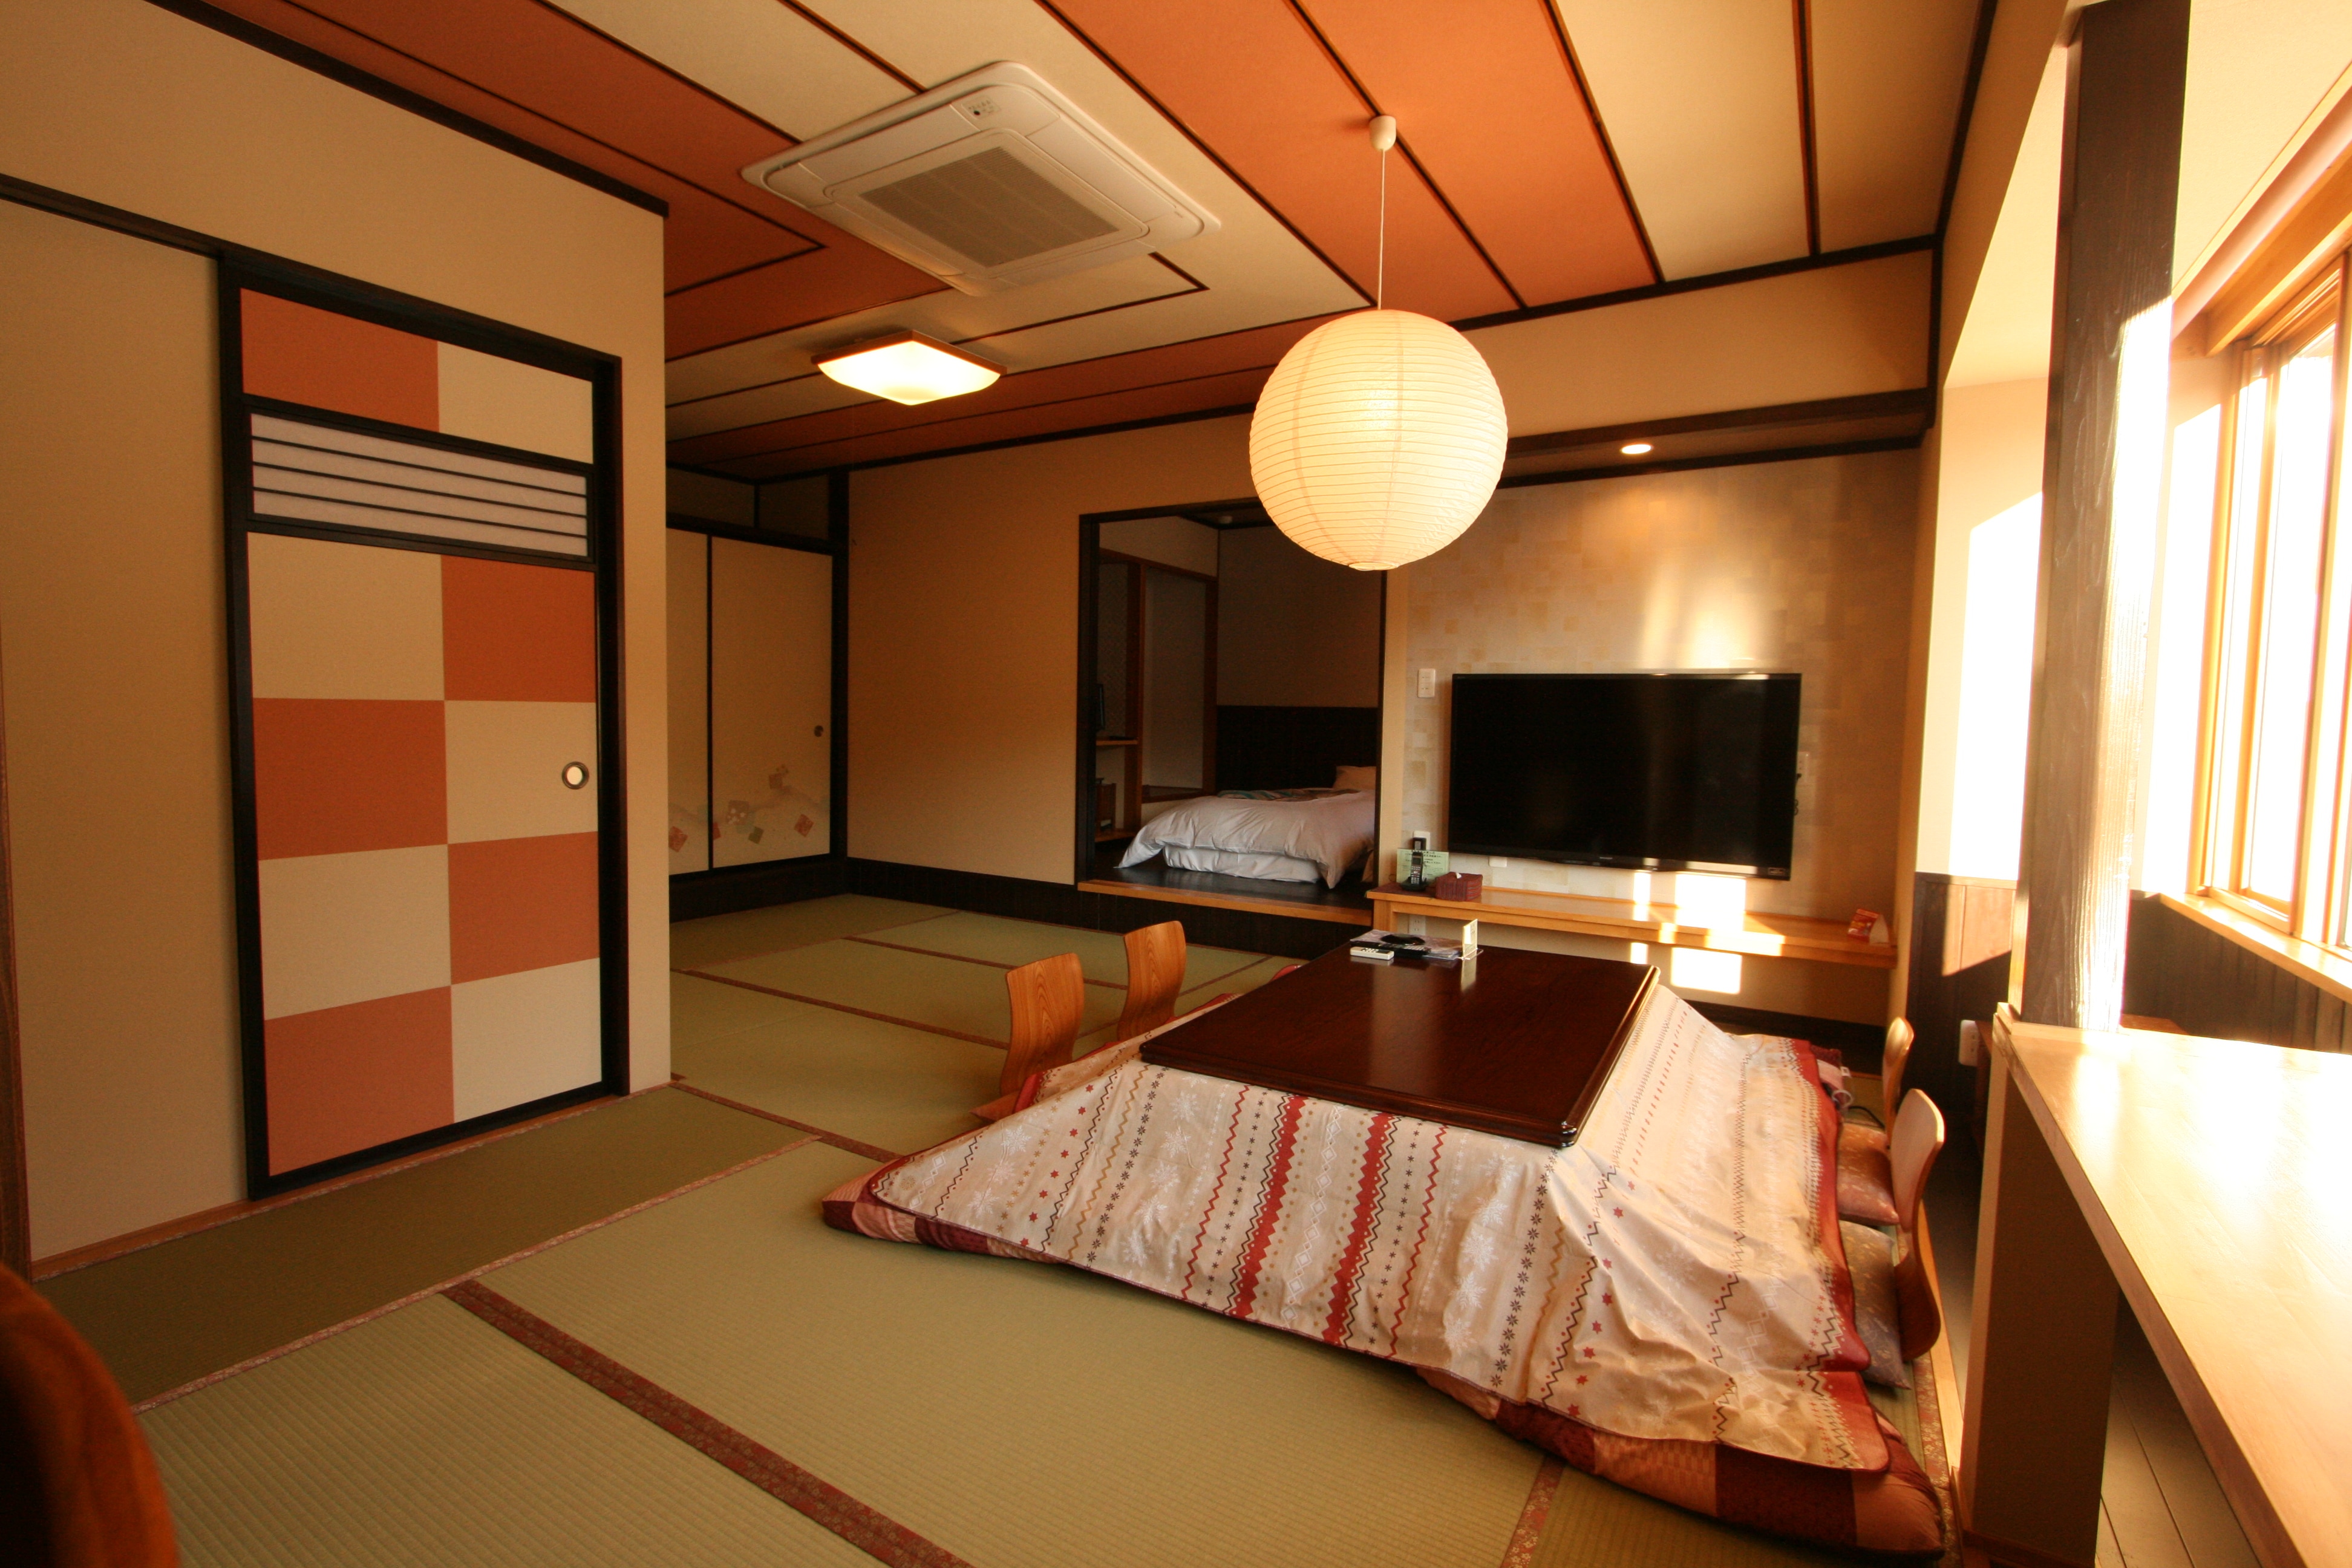 Newly established in January, R4! Twin low bed + 14 tatami mats Kotatsu, modern Japanese-style room [Special room 2nd floor only] 2 toilets and 2 washbasins